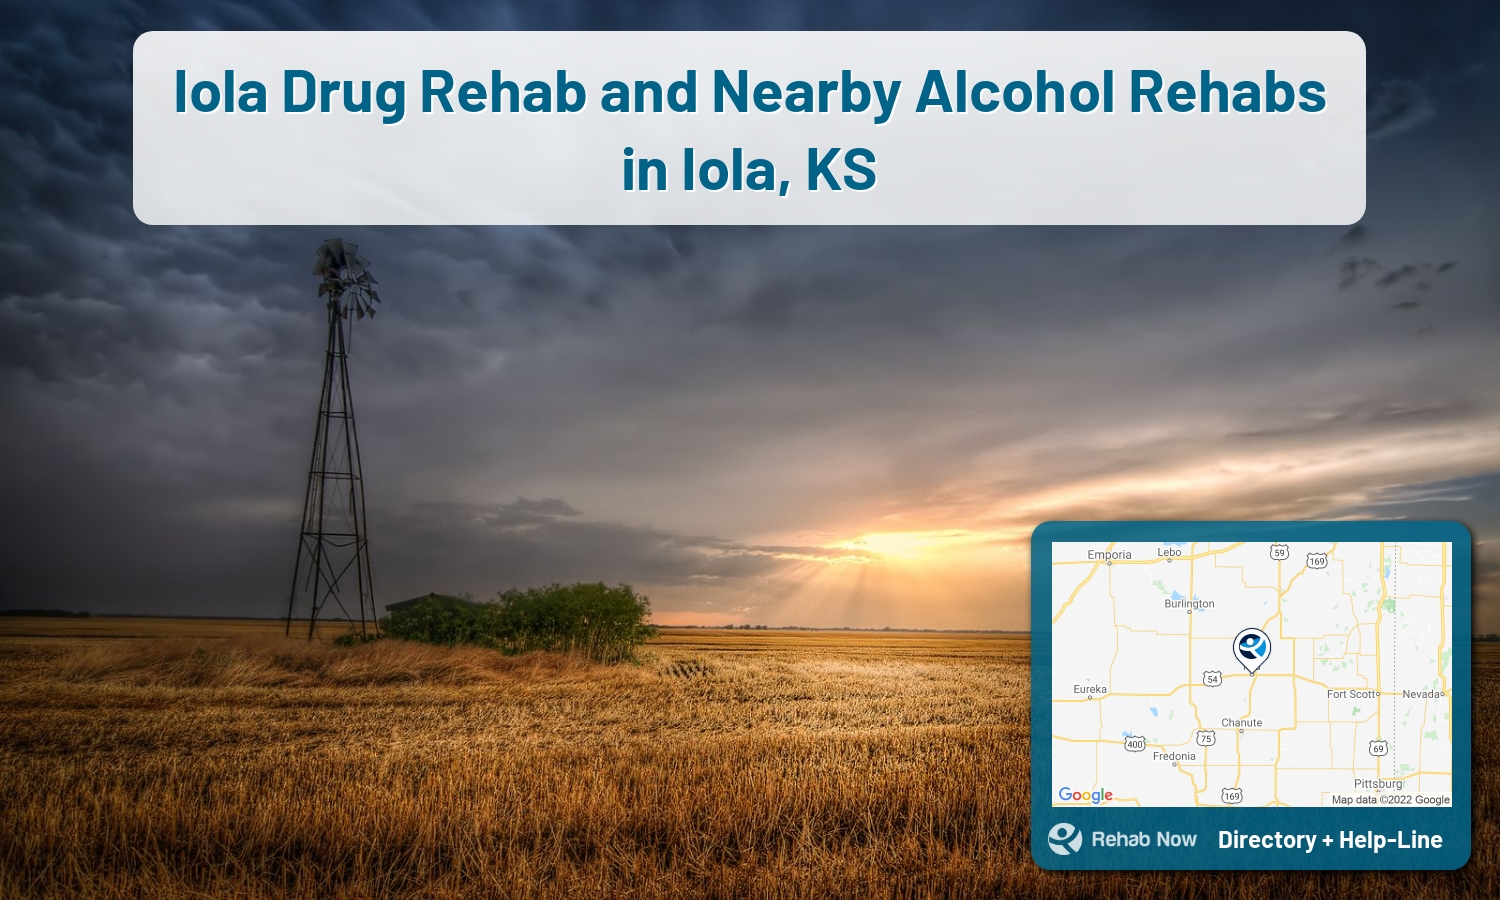 List of alcohol and drug treatment centers near you in Iola, Kansas. Research certifications, programs, methods, pricing, and more.